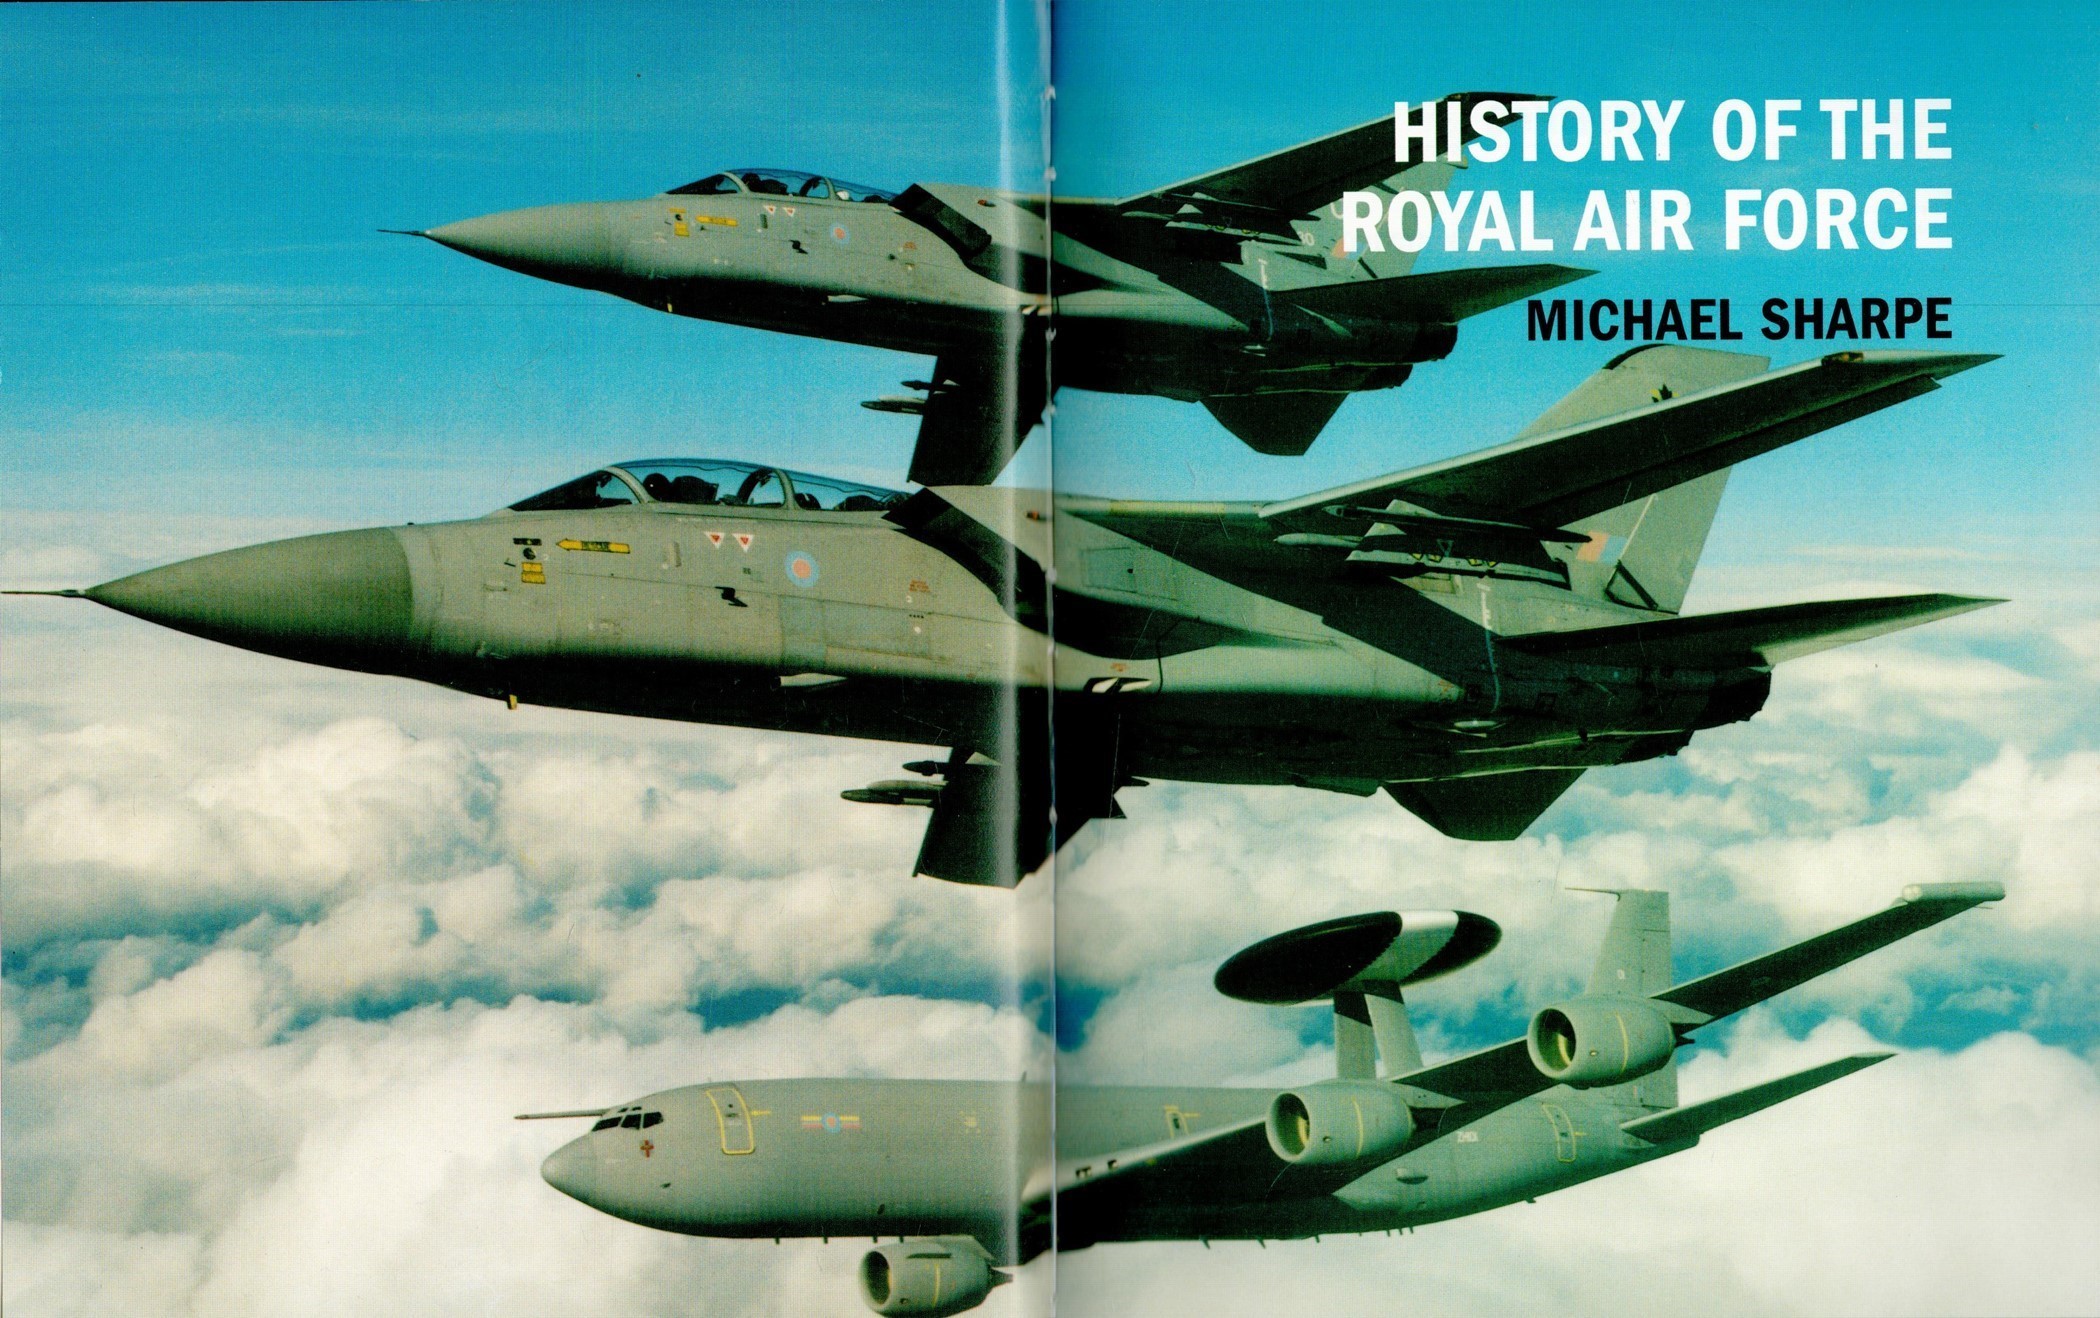 History Of the Royal Air Force Paperback Book by Michael Sharpe. Published in 2002. Fair Overall - Image 2 of 3